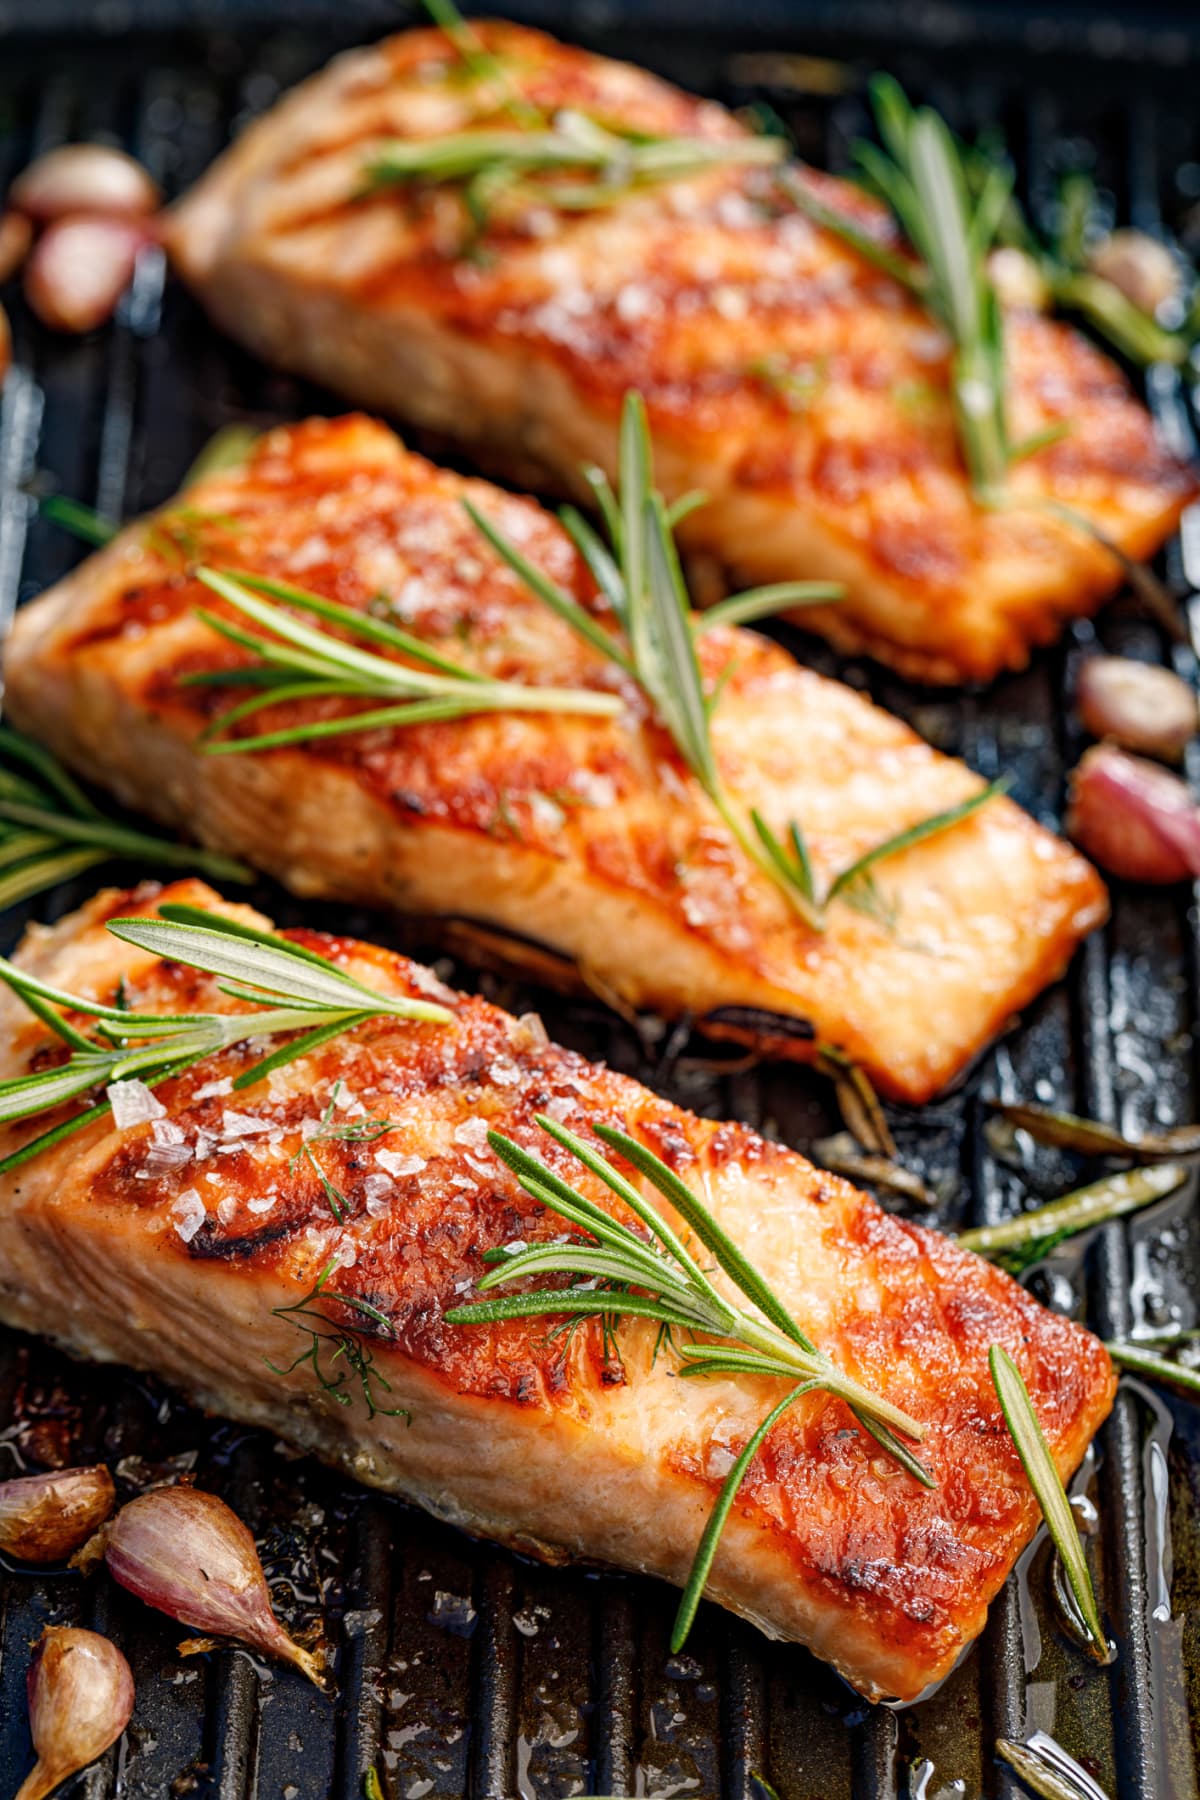 Grilled salmon fillets sprinkled with fresh herbs